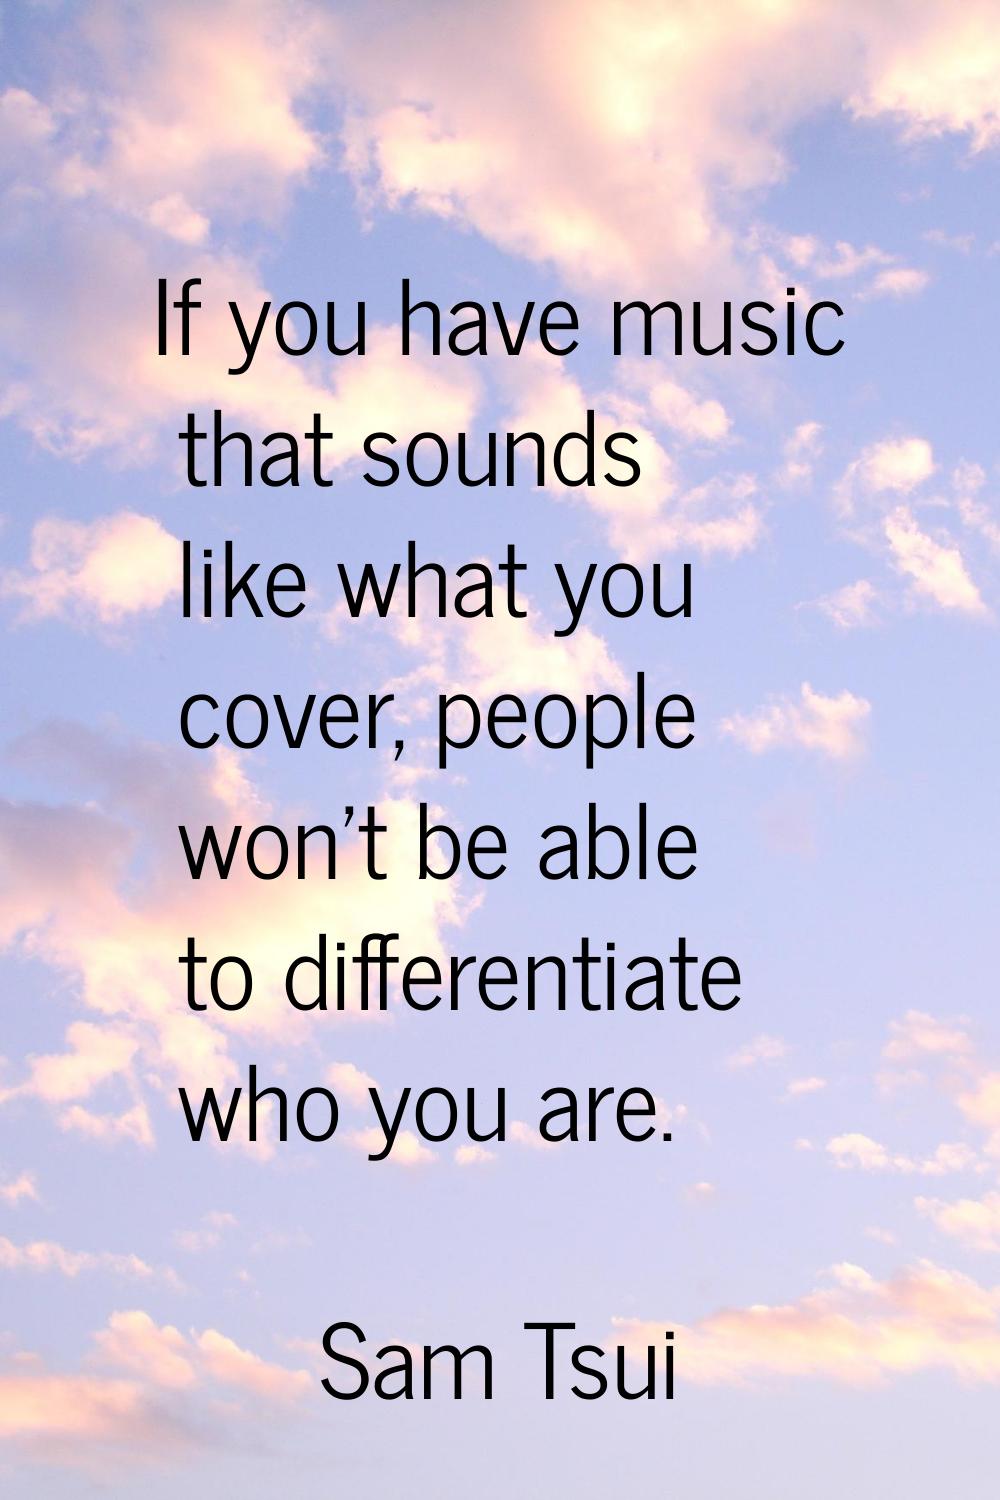 If you have music that sounds like what you cover, people won't be able to differentiate who you ar